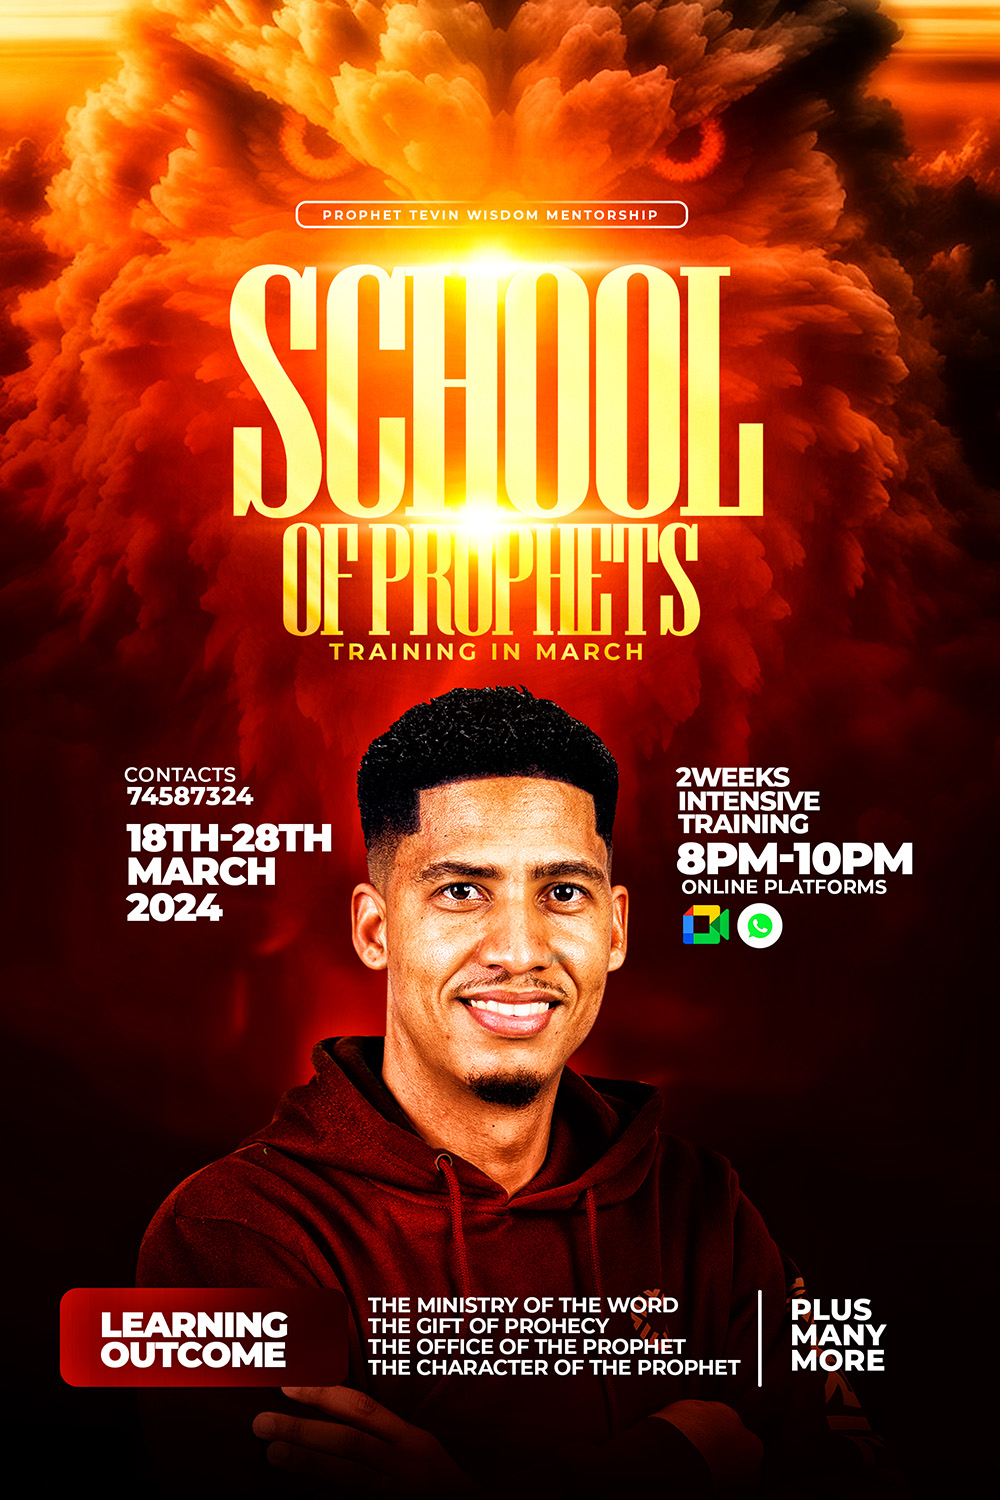 school of prophets church Flyer Template pinterest preview image.